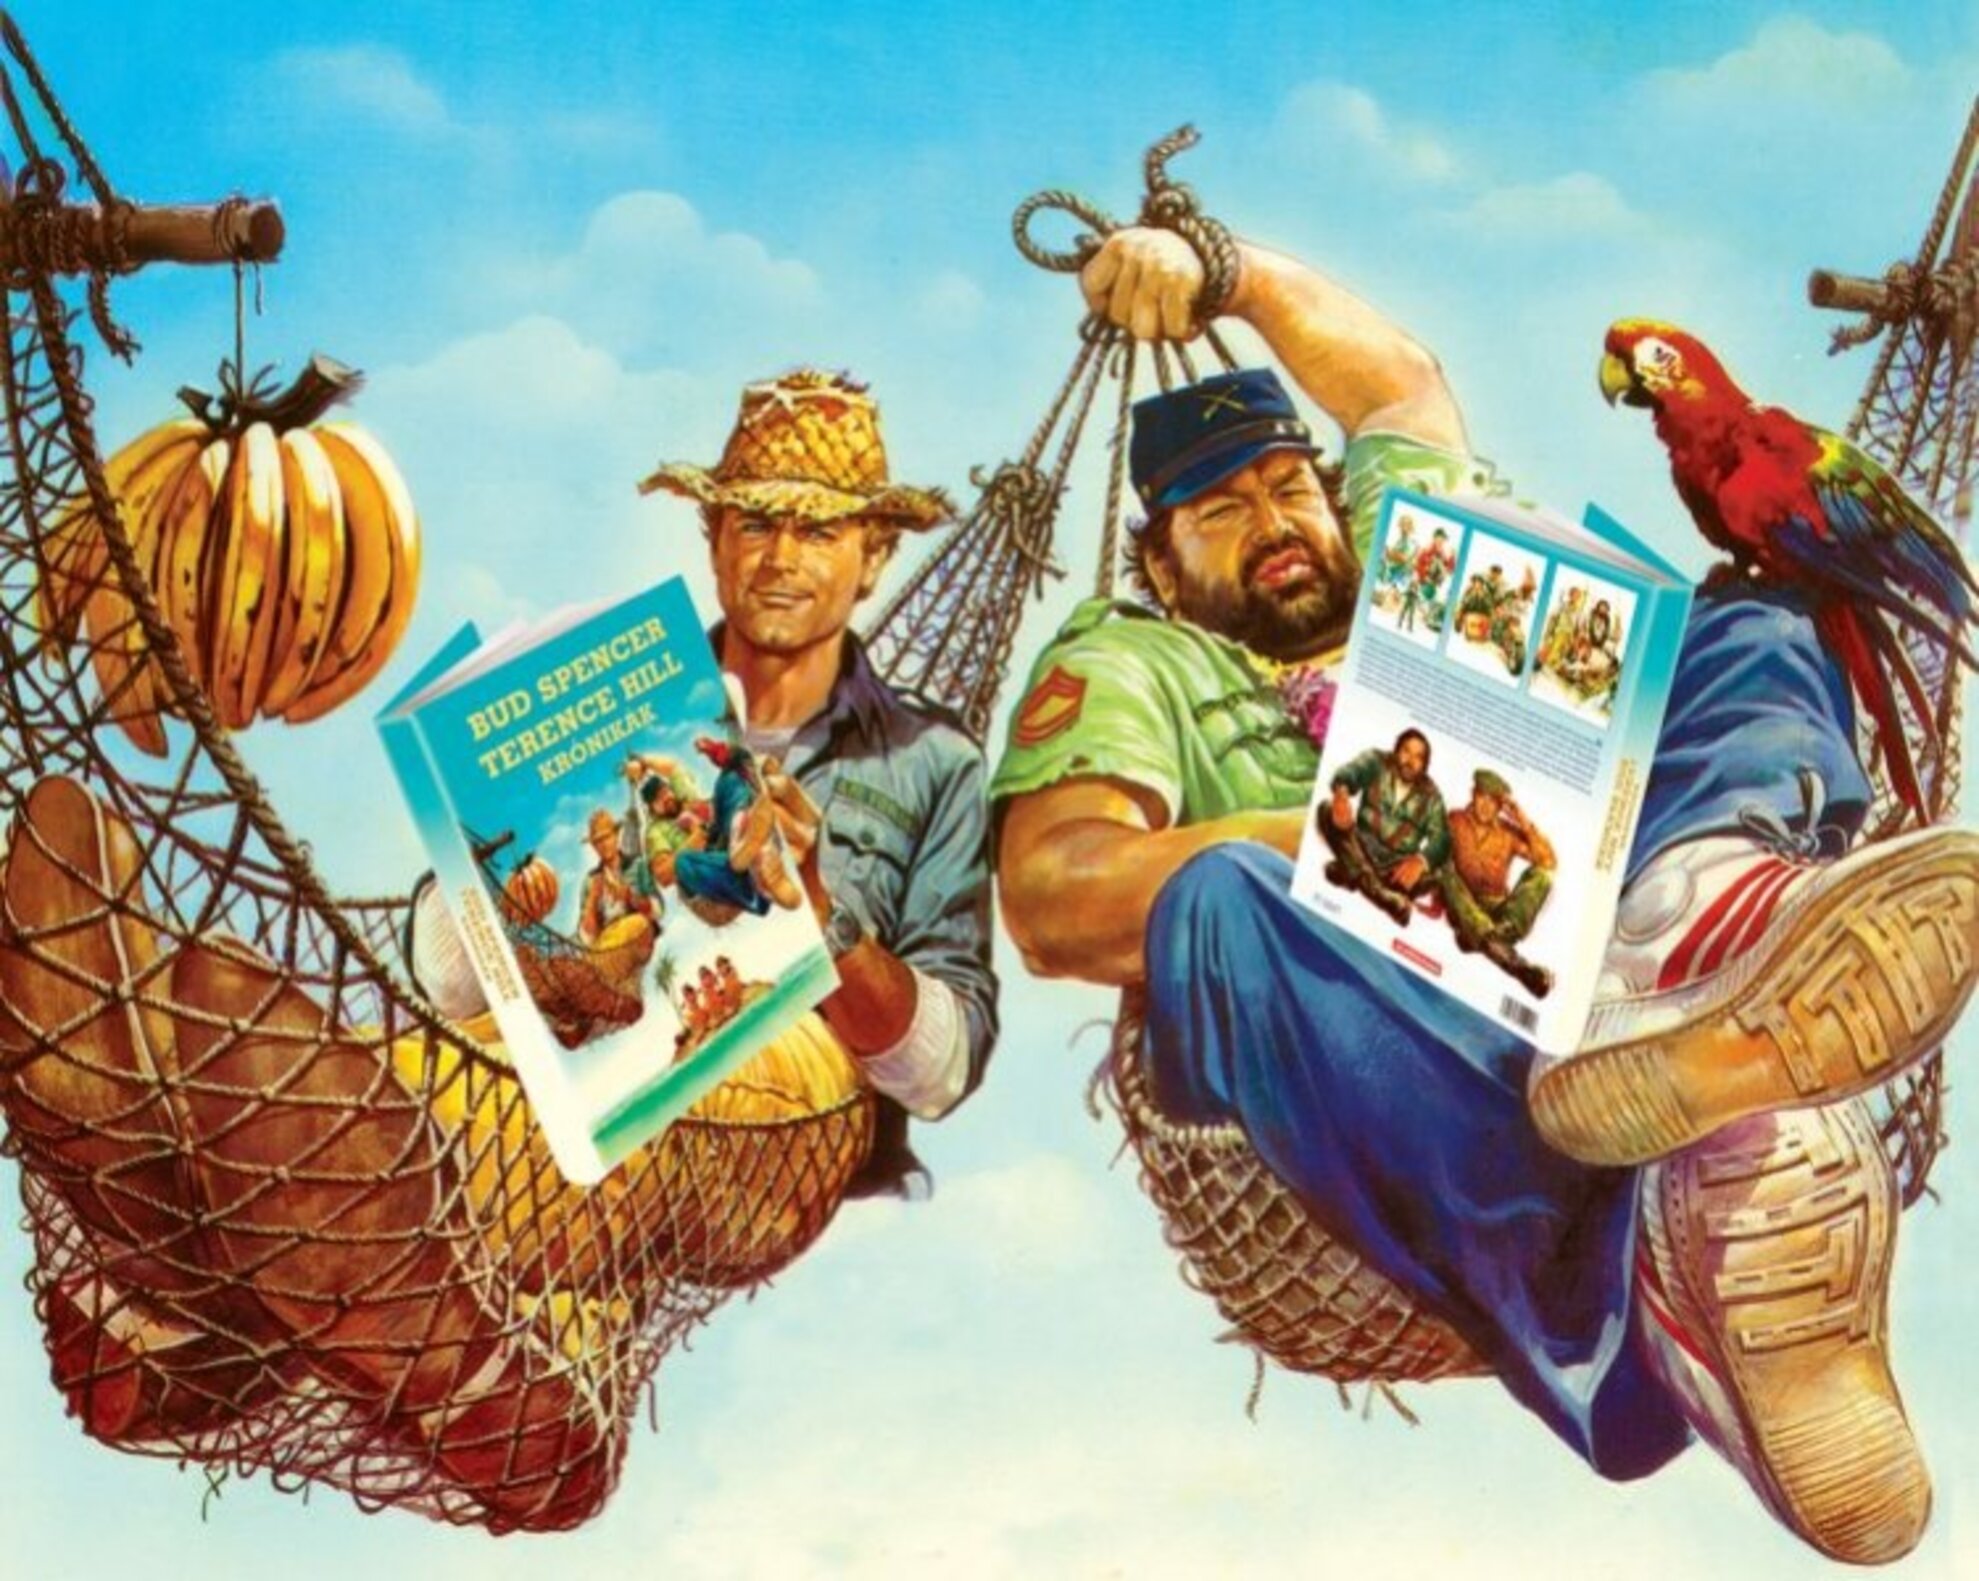 The Chronicles of Bud Spencer & Terence Hill Book Release Tour - English -  WeloveBudapest